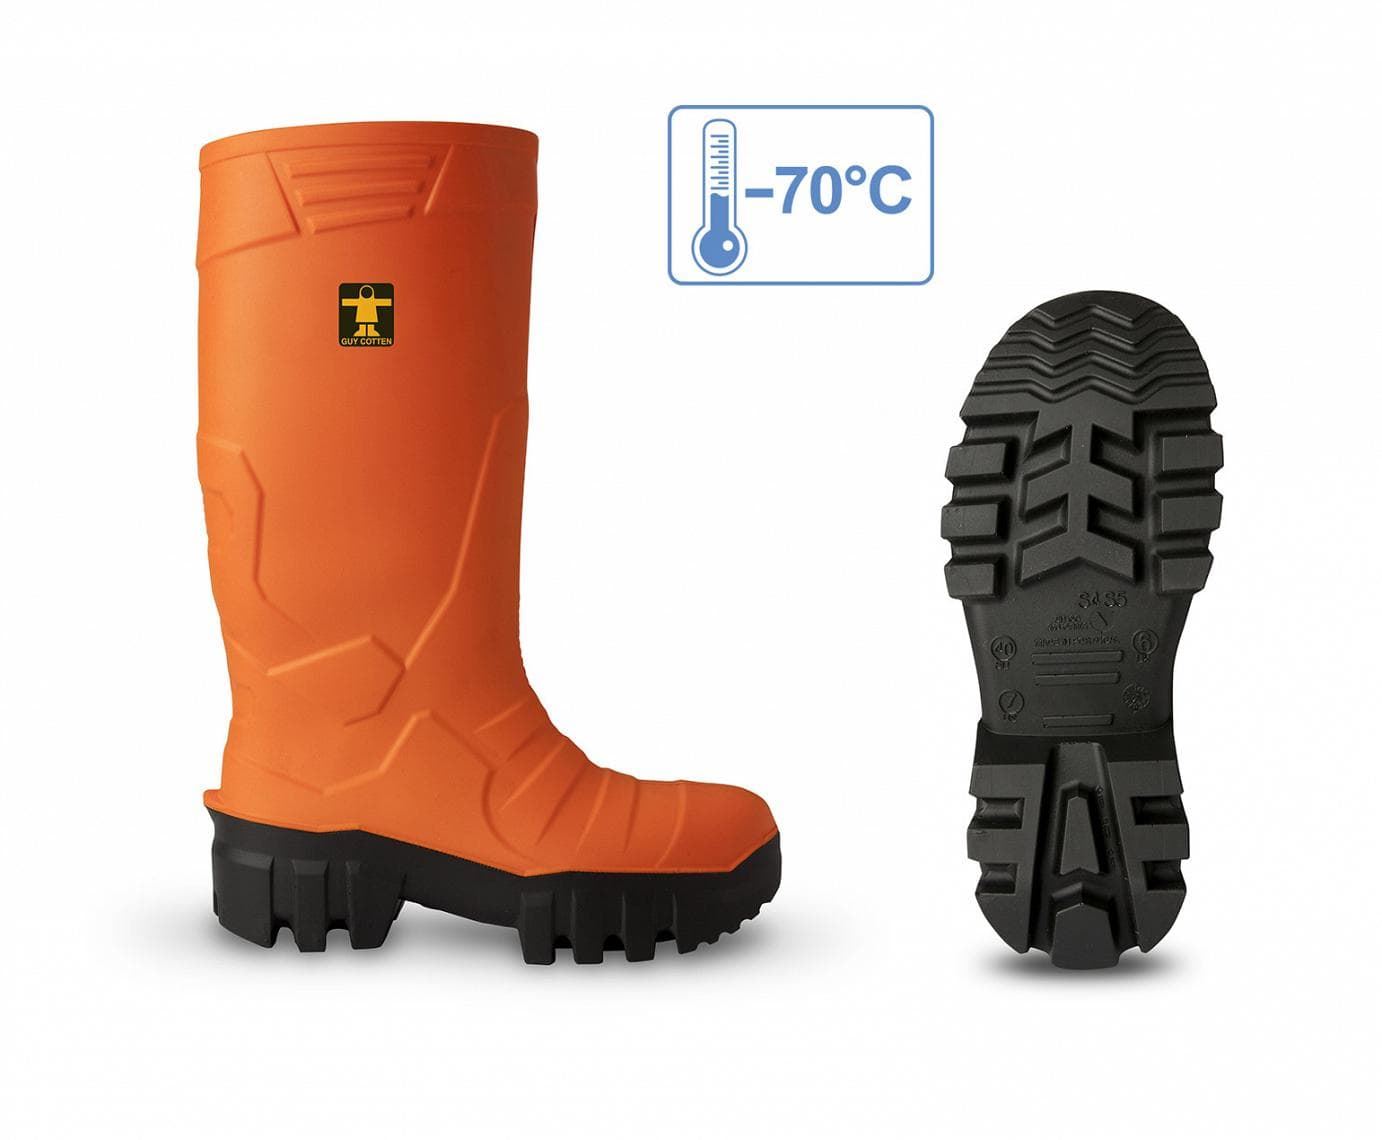 Bota impermeable GUY COTTEN GC Thermo - Imagen 2